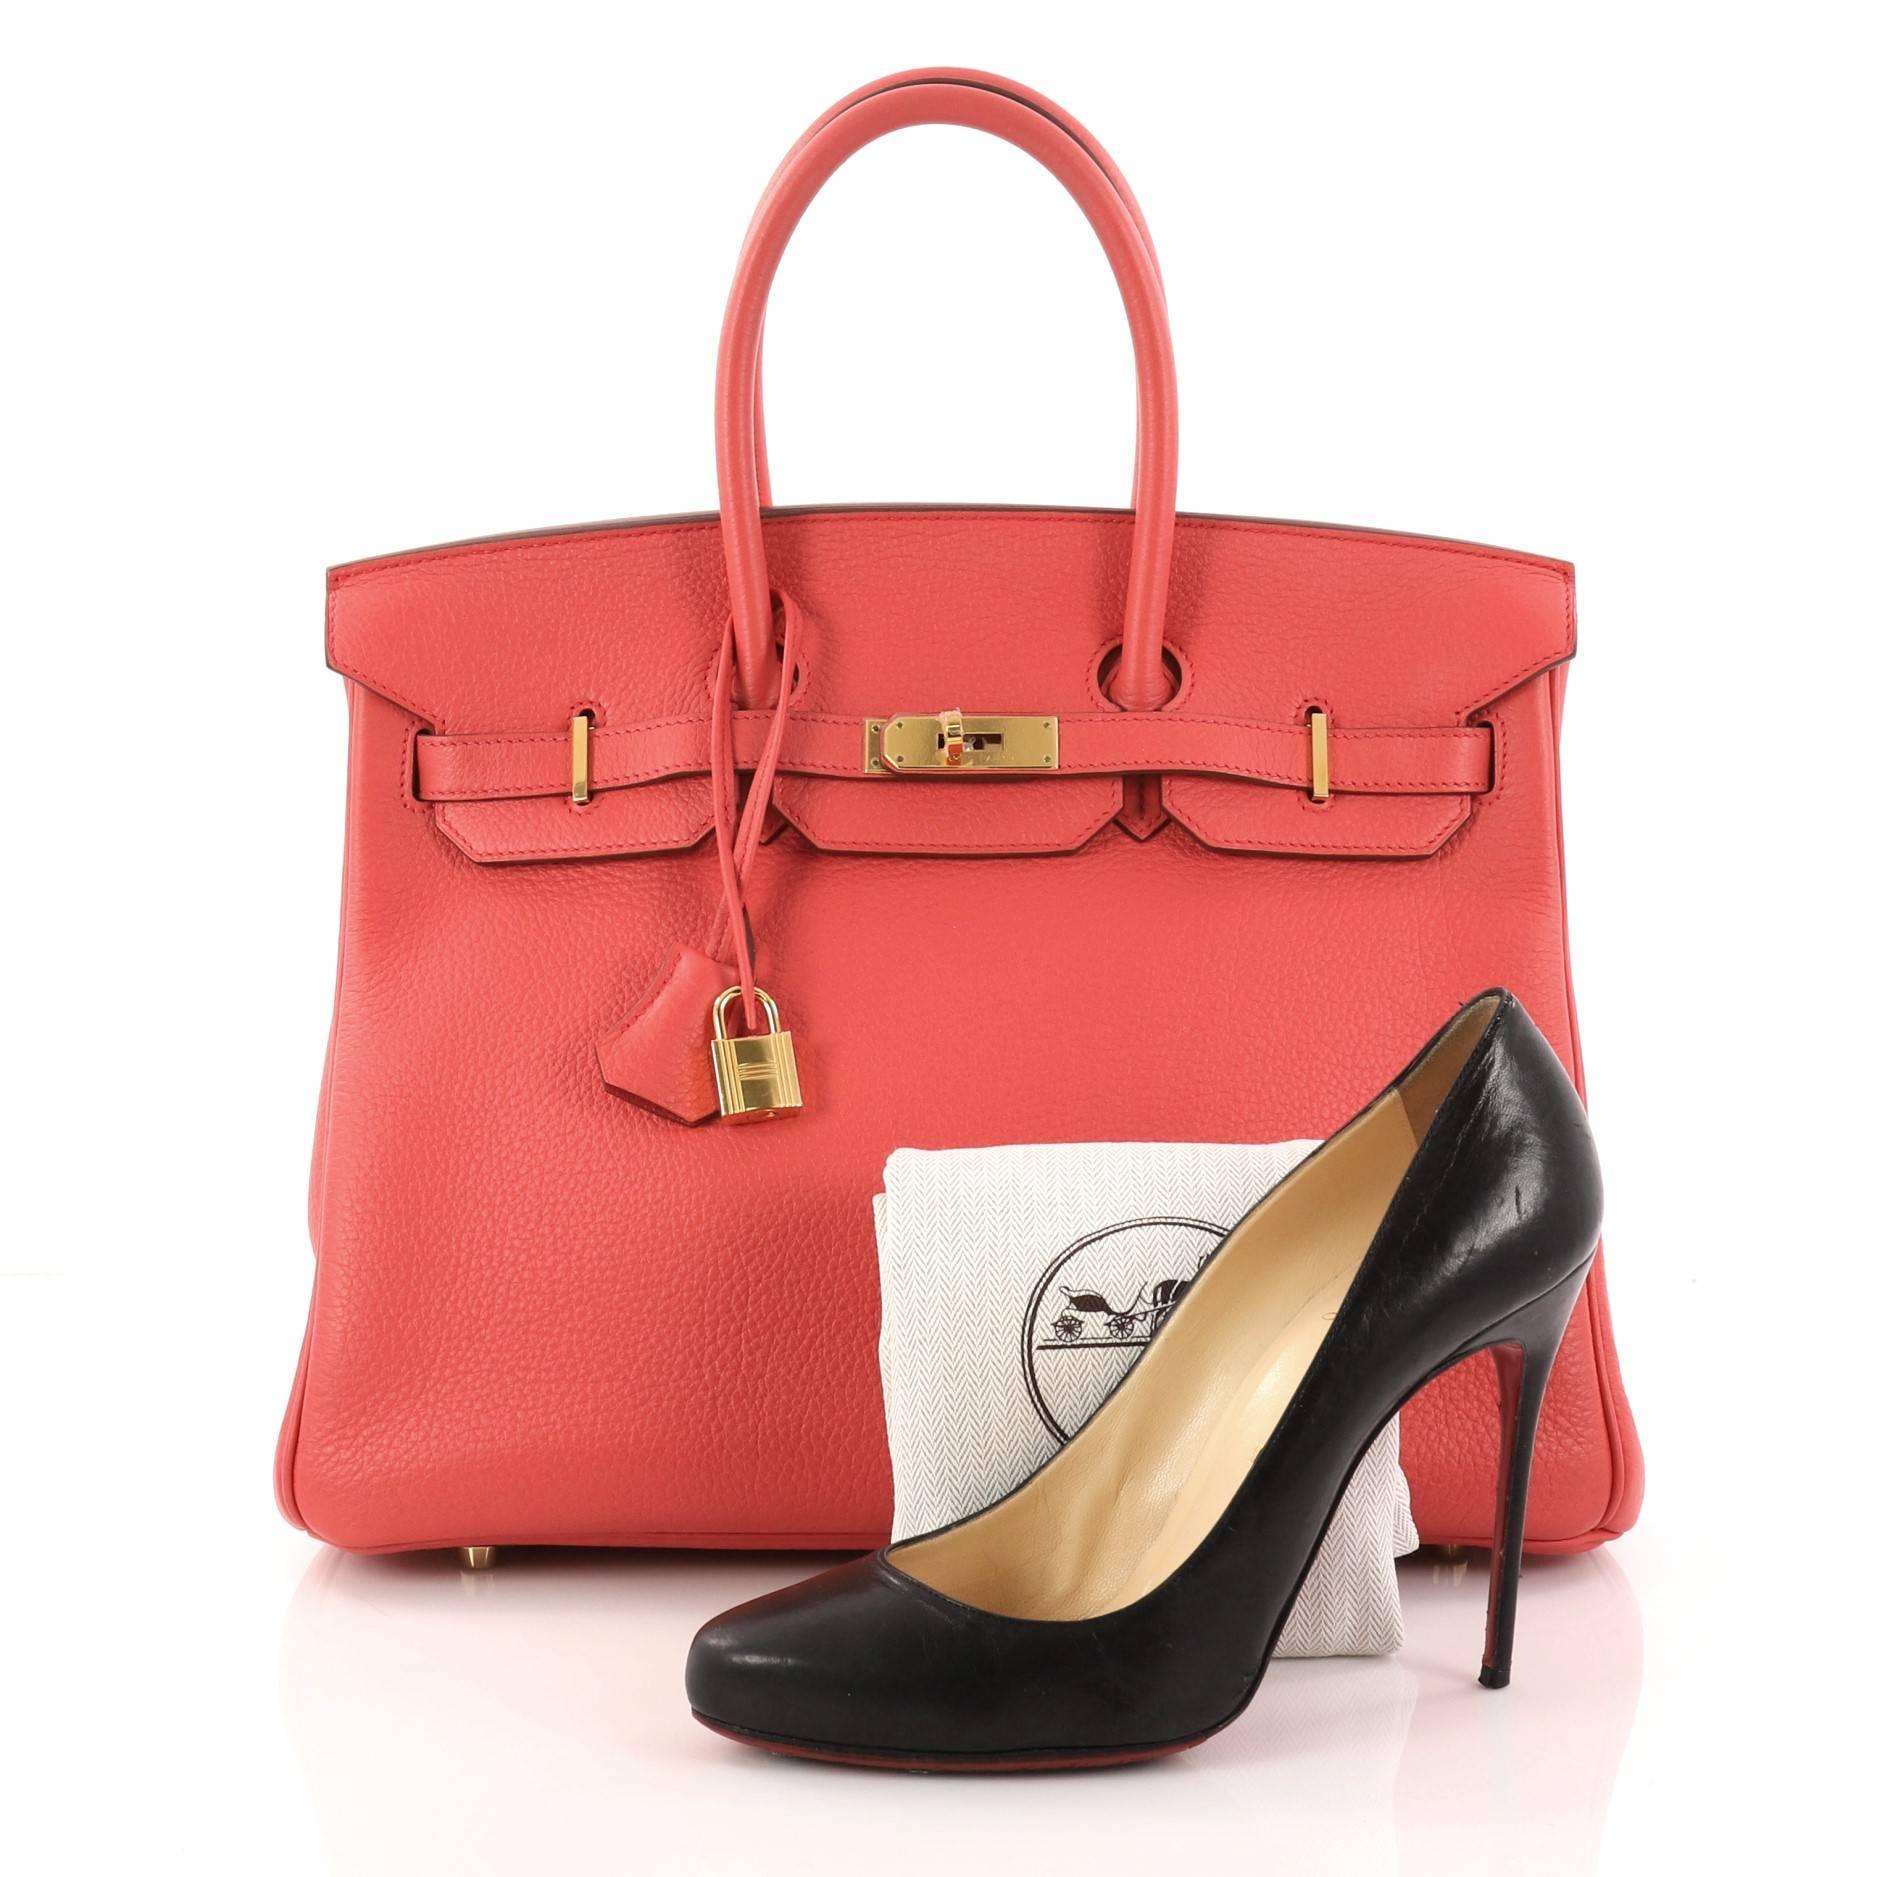 This authentic Hermes Birkin Handbag Bougainvillea Togo With Gold Hardware 35 is synonymous to traditional Hermes luxury. Crafted with sturdy, scratch-resistant Bougainvillea togo leather, this eye-catching tote features dual-rolled top handles, a